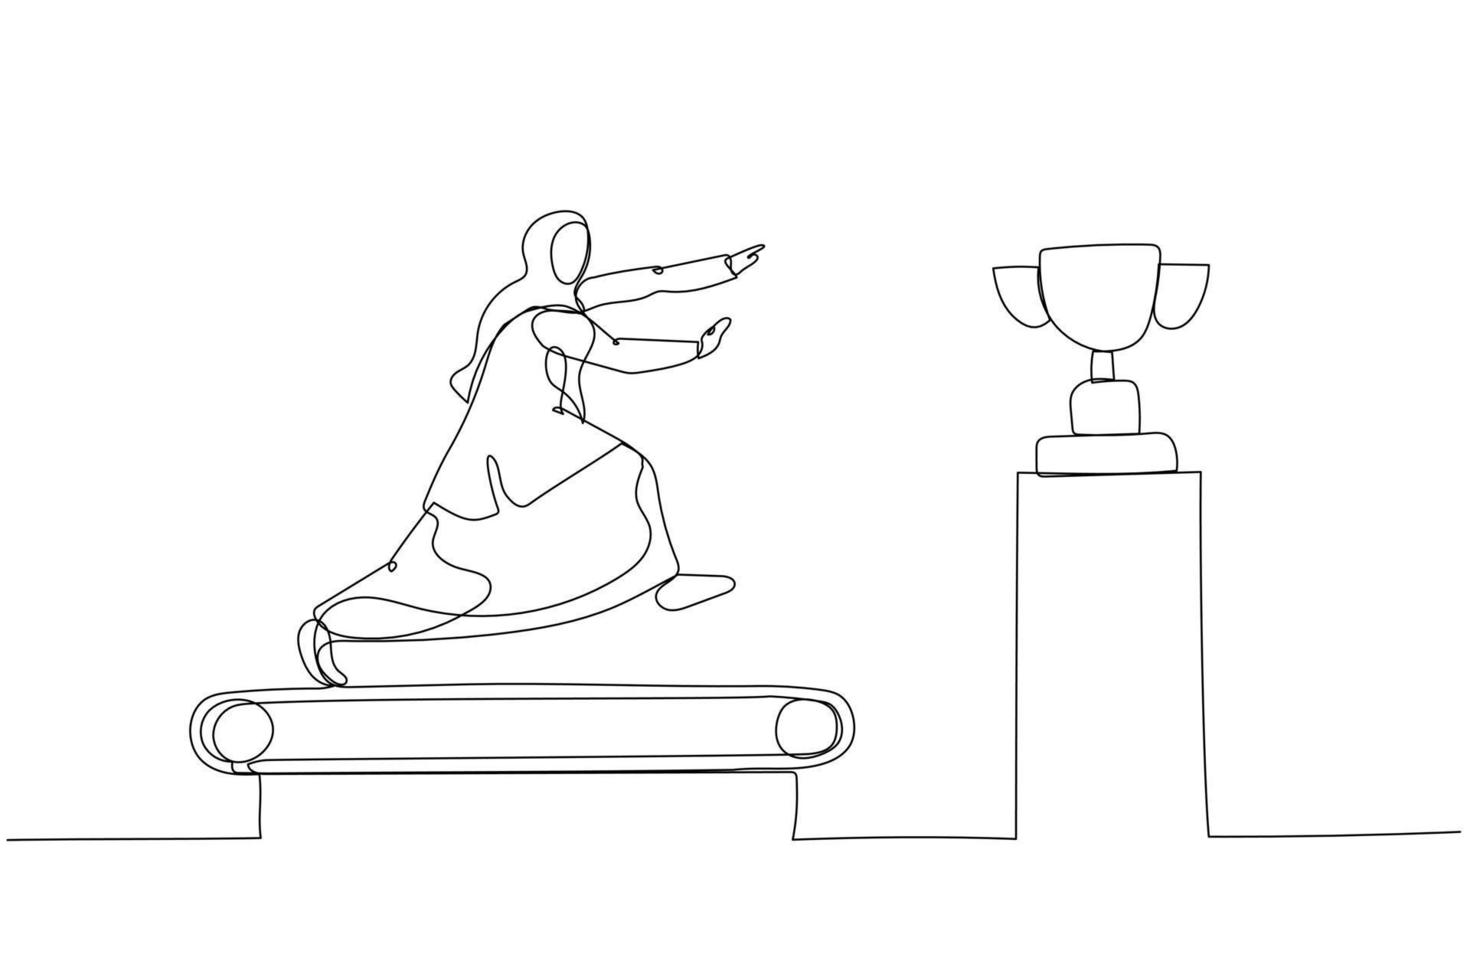 Illustration of muslim businesswoman running on the treadmill try to get trophy concept of rat race. Single continuous line art style vector